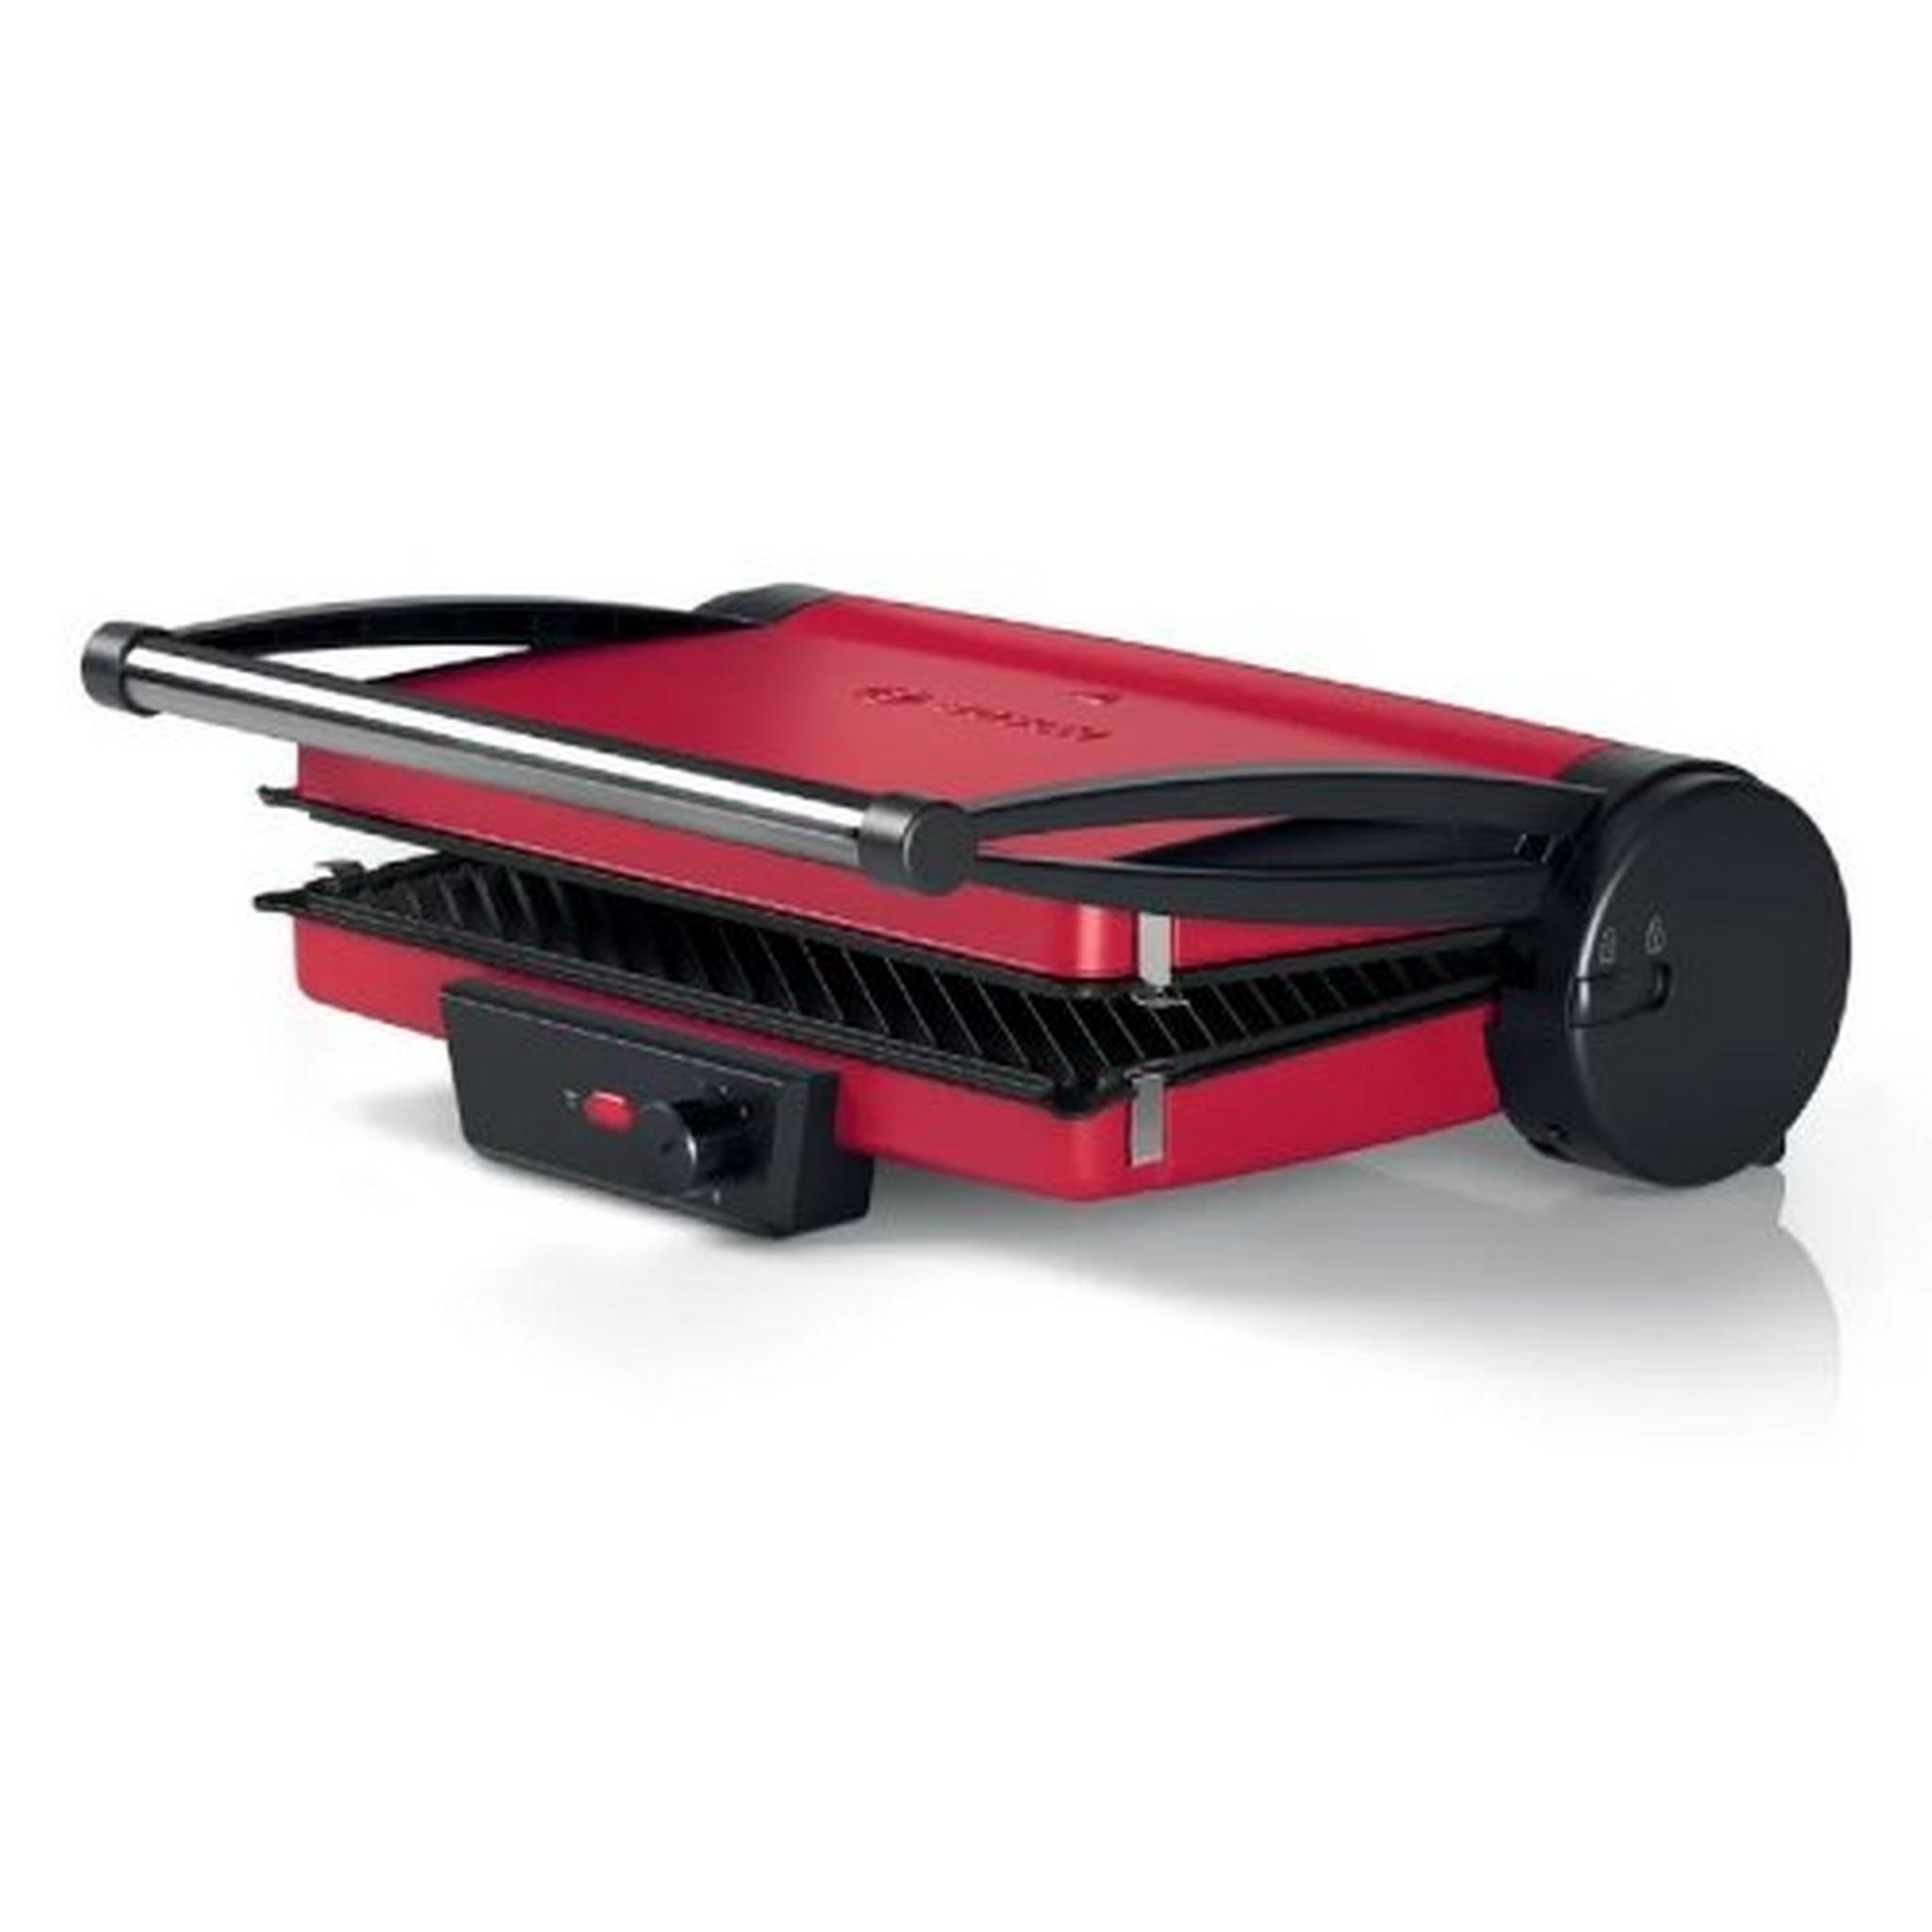 Bosch 2000W Contact Grill (TCG4104)